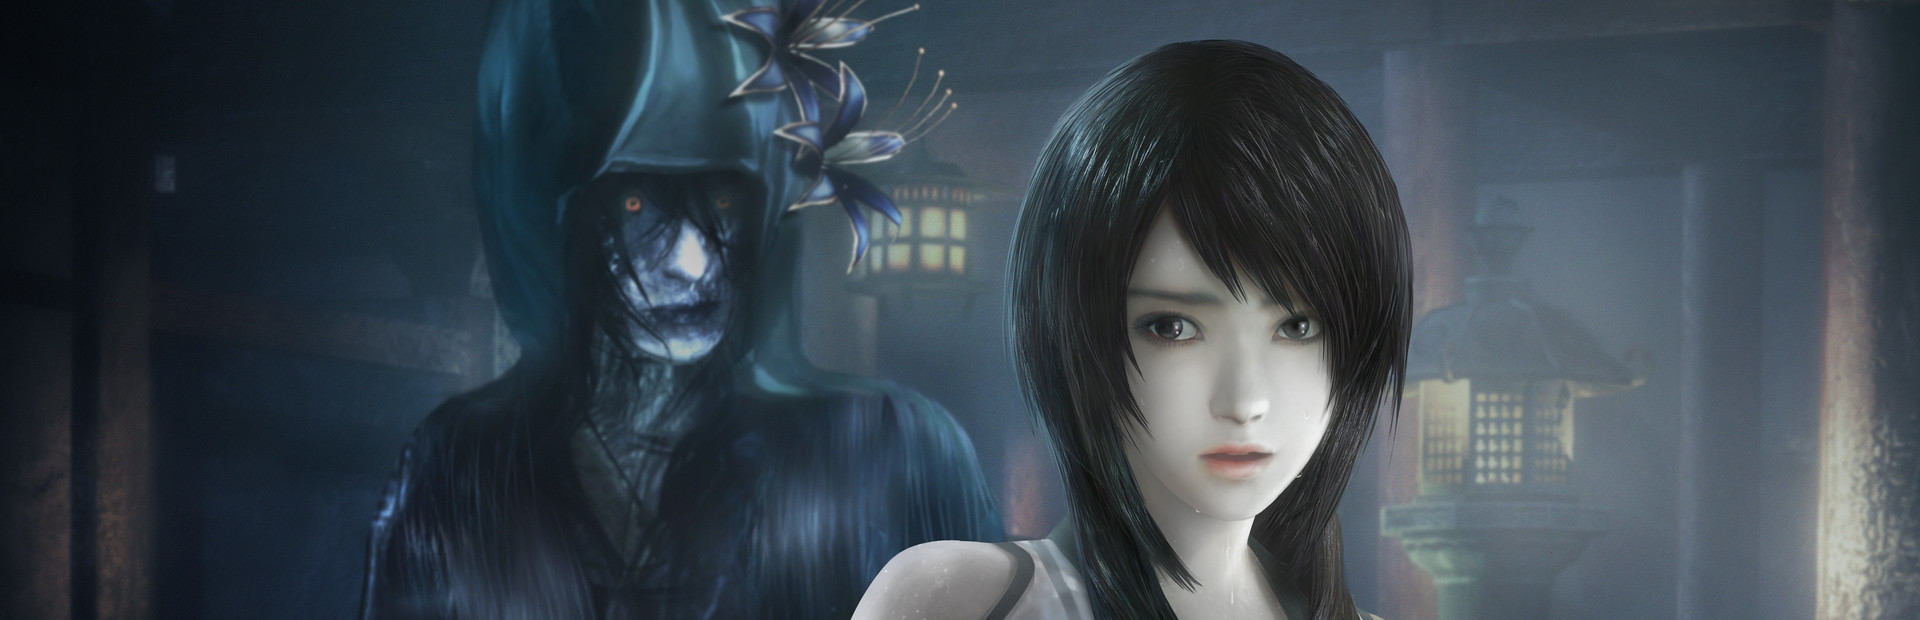 FATAL FRAME / PROJECT ZERO: Maiden of Black Water cover image